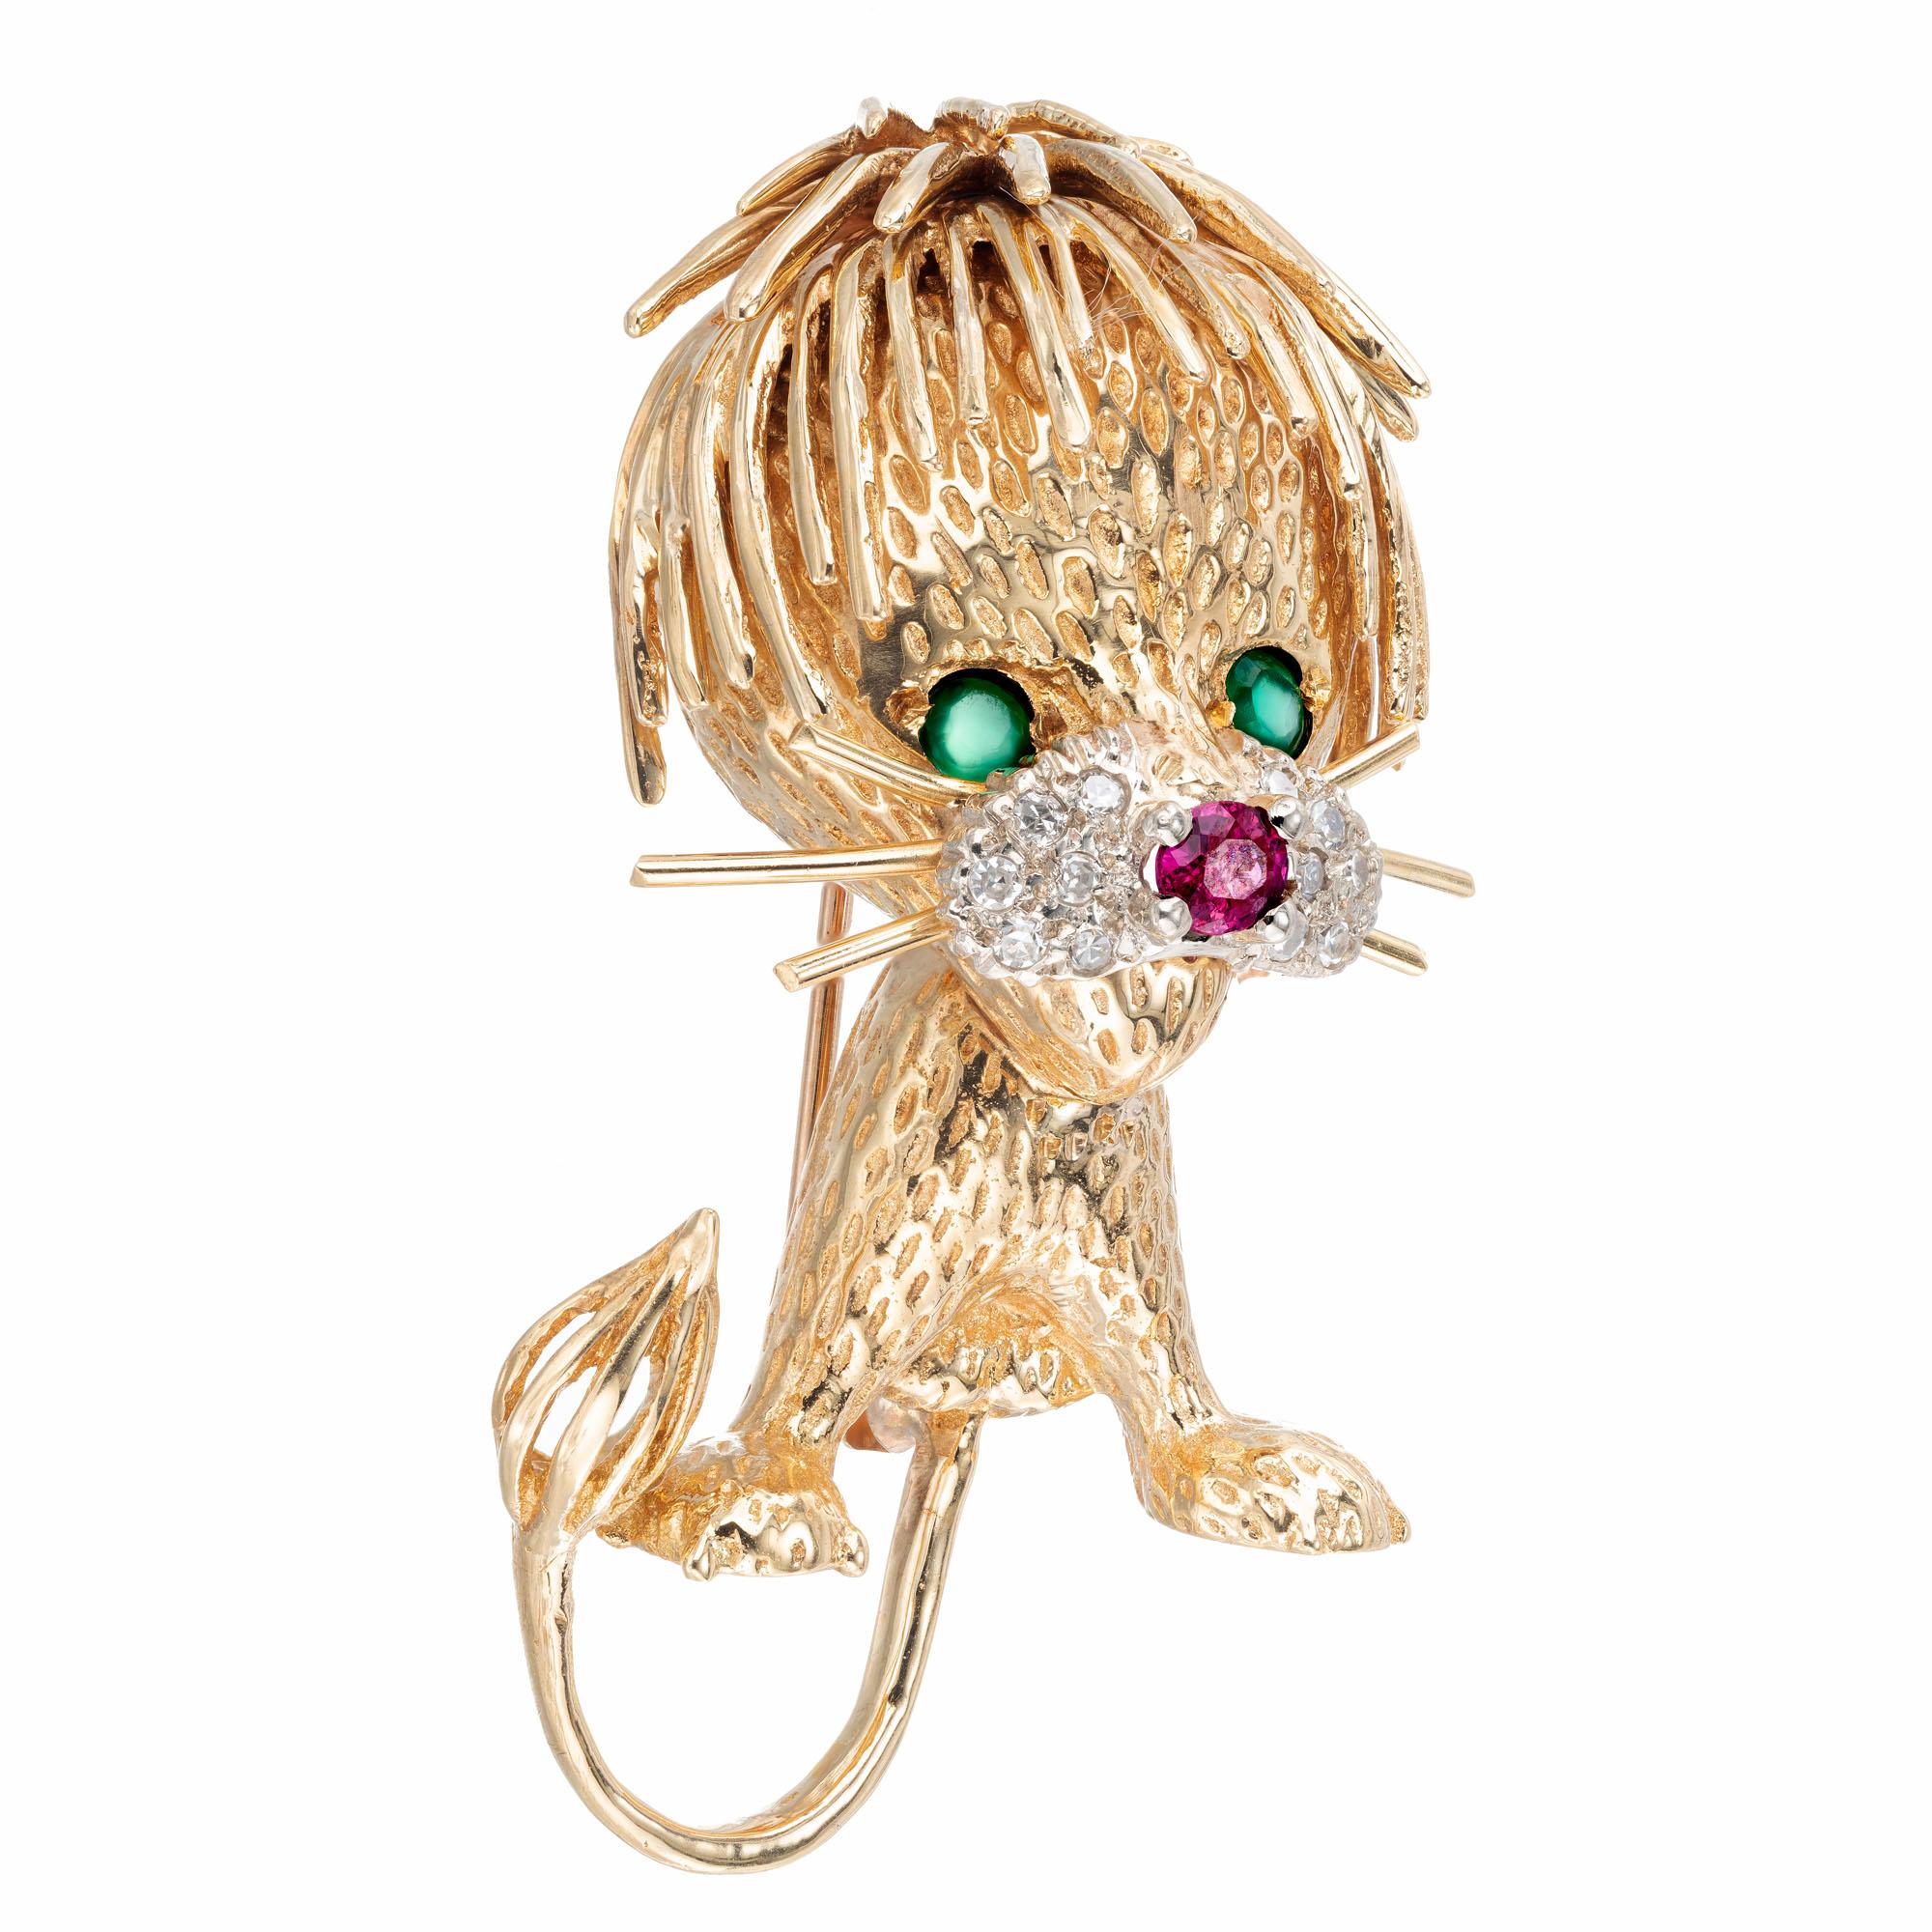 Lion cub 18k yellow gold brooch with ruby, emerald and white diamonds. Signed CF. Hand textured. 

12 single cut diamonds approx. total weight .15cts, H, VS - SI 
Two 2.5mm genuine Emeralds approx. total weight .20cts 
One 3mm blood red genuine Ruby